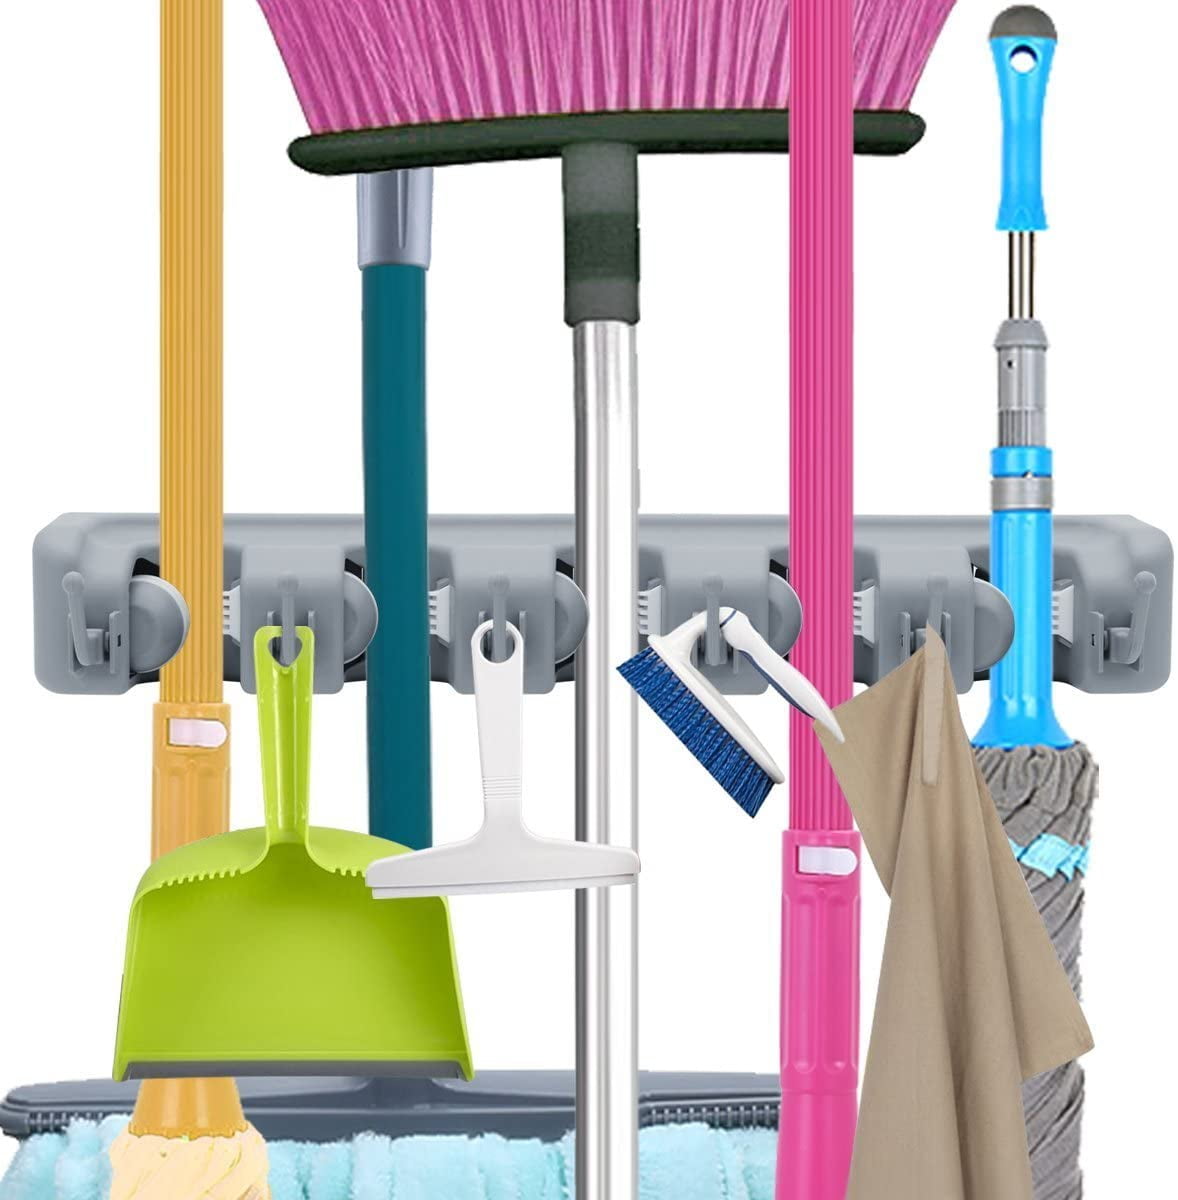 Details about   Wall Mounted Broom Holder Commercial Organizer Storage Rack for Kitchen Garden 